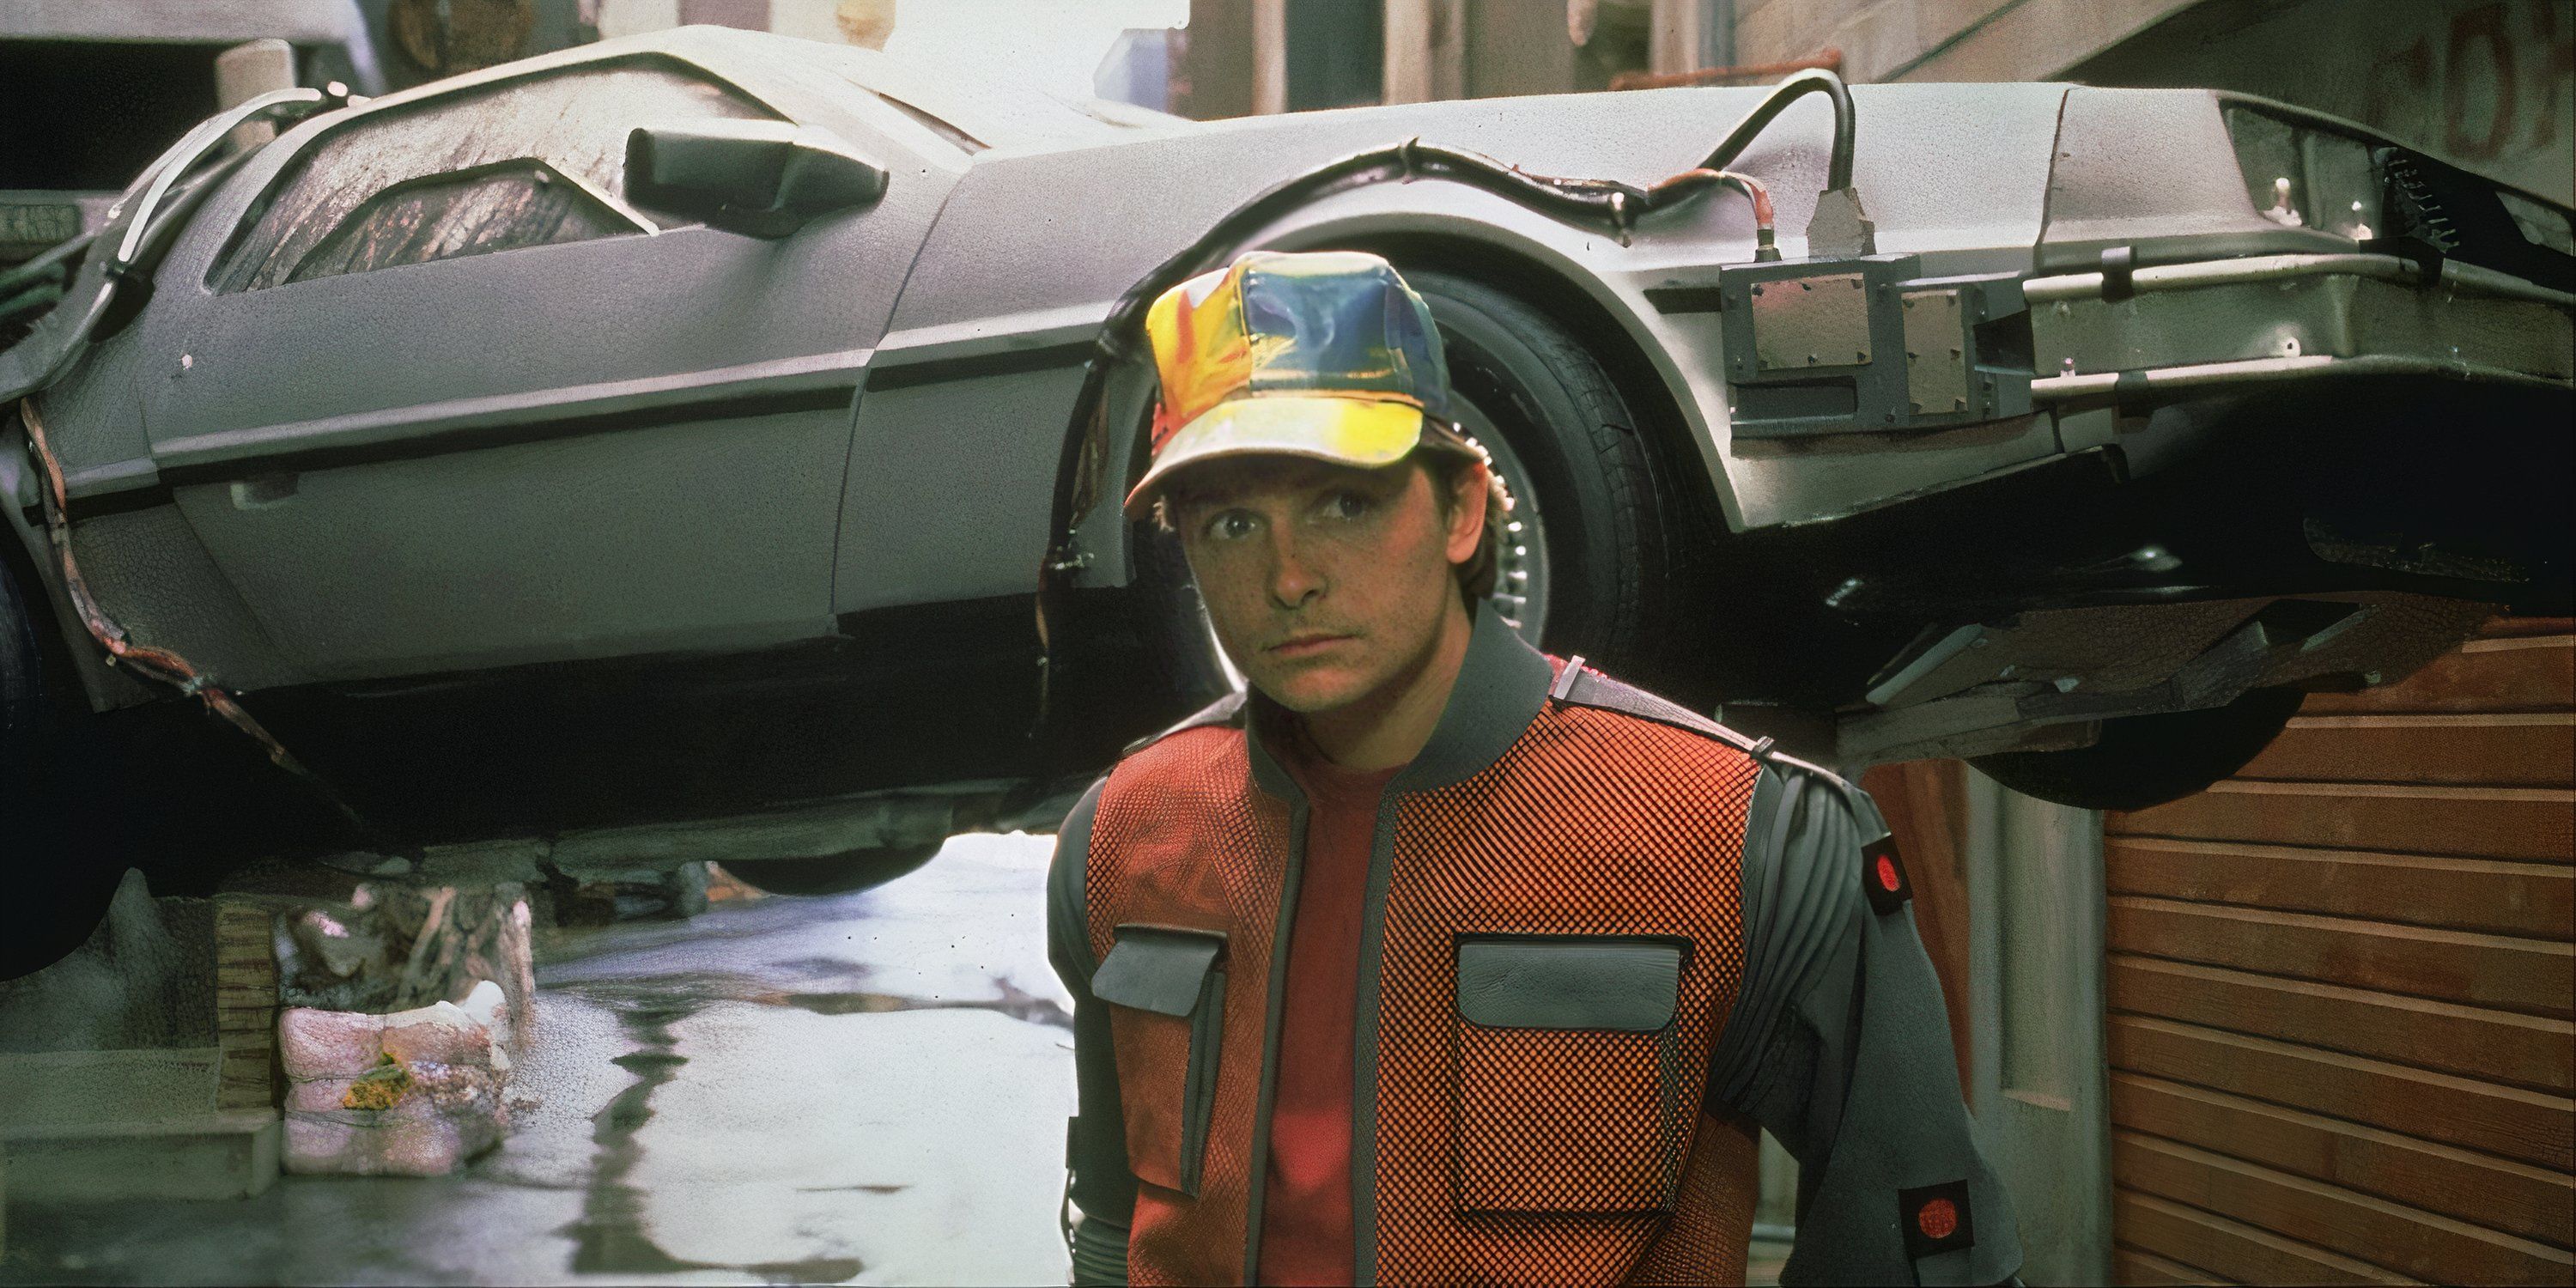 Michael J. Fox as Marty McFly standing in front of a hovering DeLorean in Back to the Future Part II